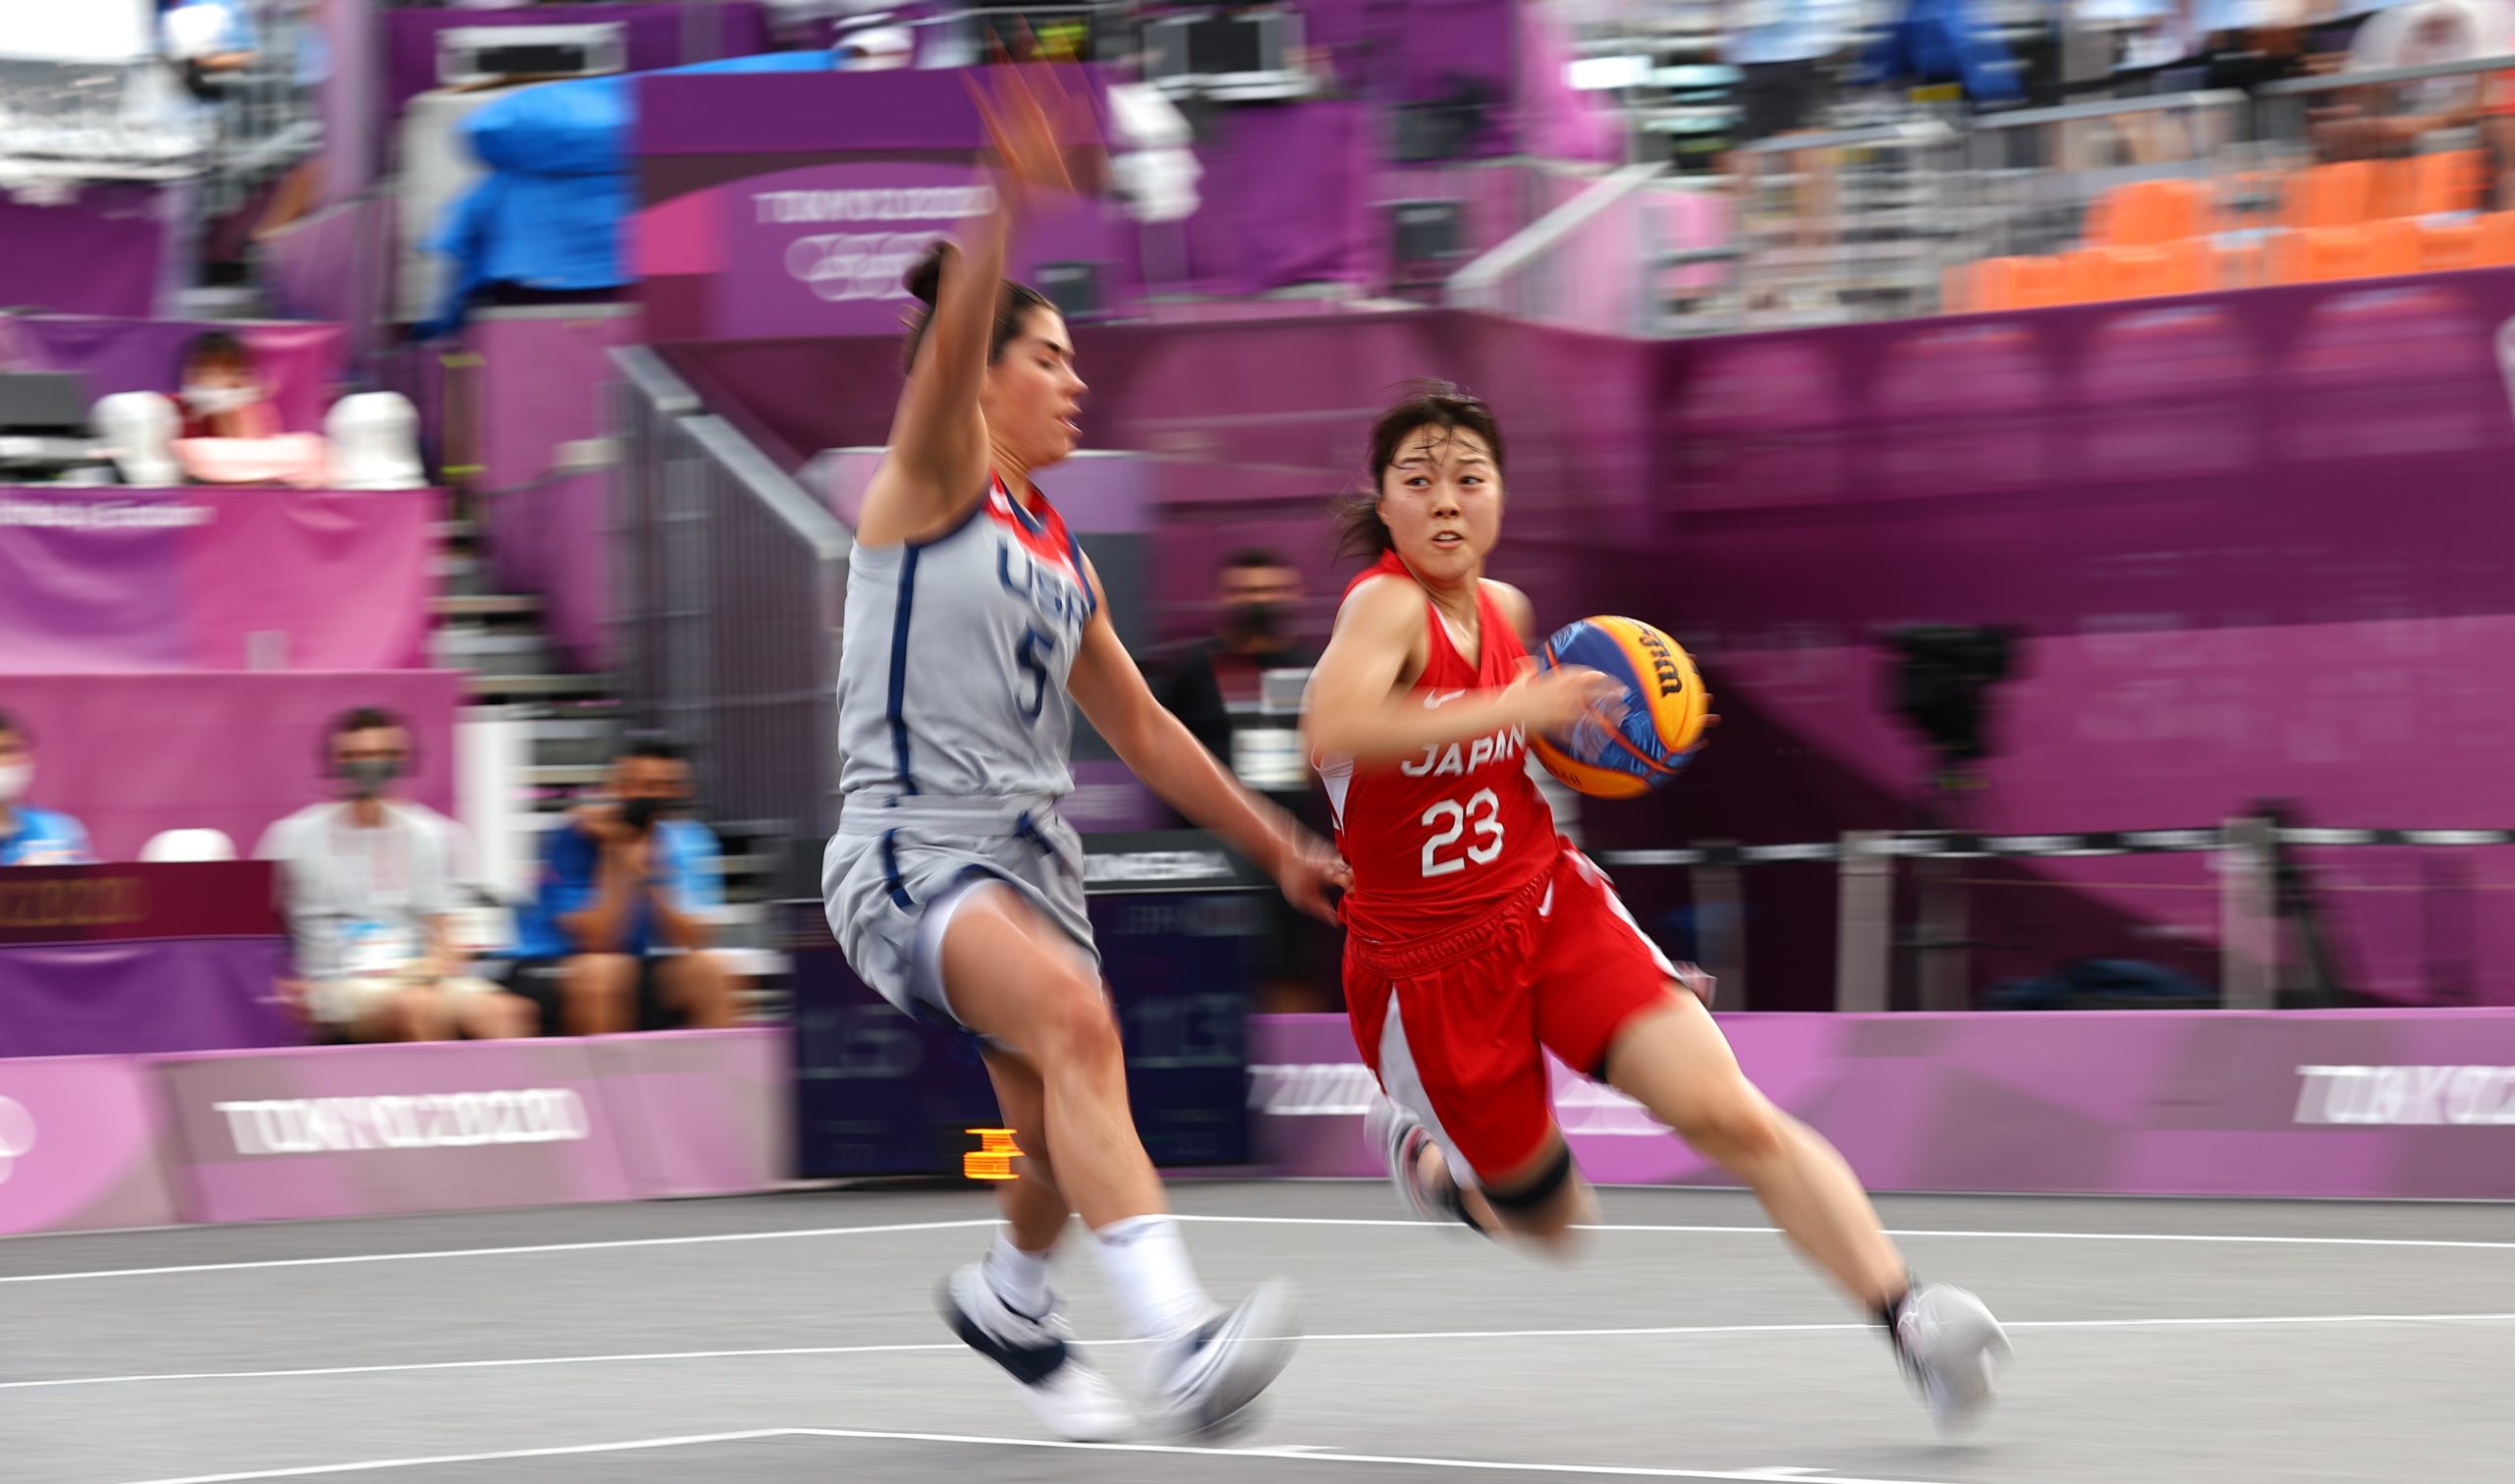 Tokyo 2020 Olympics - Basketball 3x3 - Women - Pool A - United States v Japan - Aomi Urban Sports Park, Tokyo, Japan - July 27, 2021. Mai Yamamoto of Japan in action with Kelsey Plum of the United States during a match. 